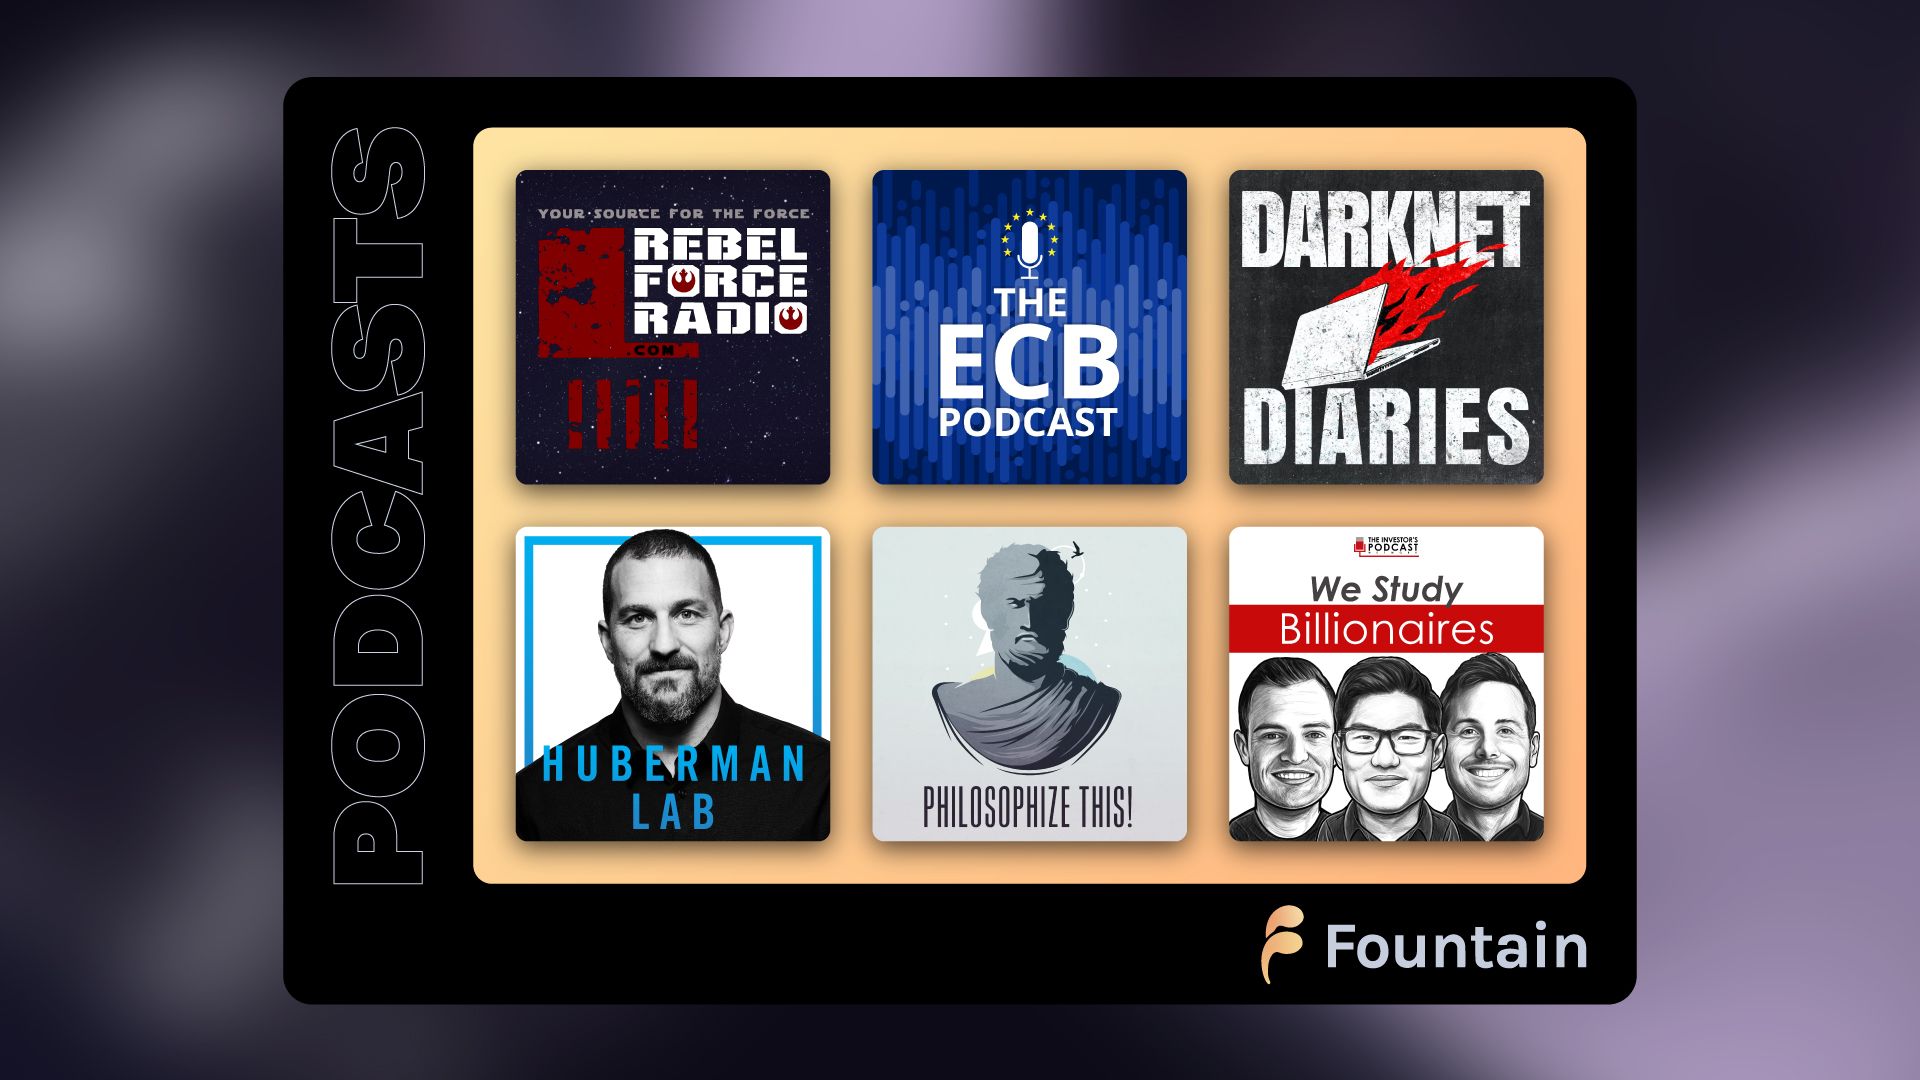 ZEBEDEE's top picks on to listen on Fountain while earning money.